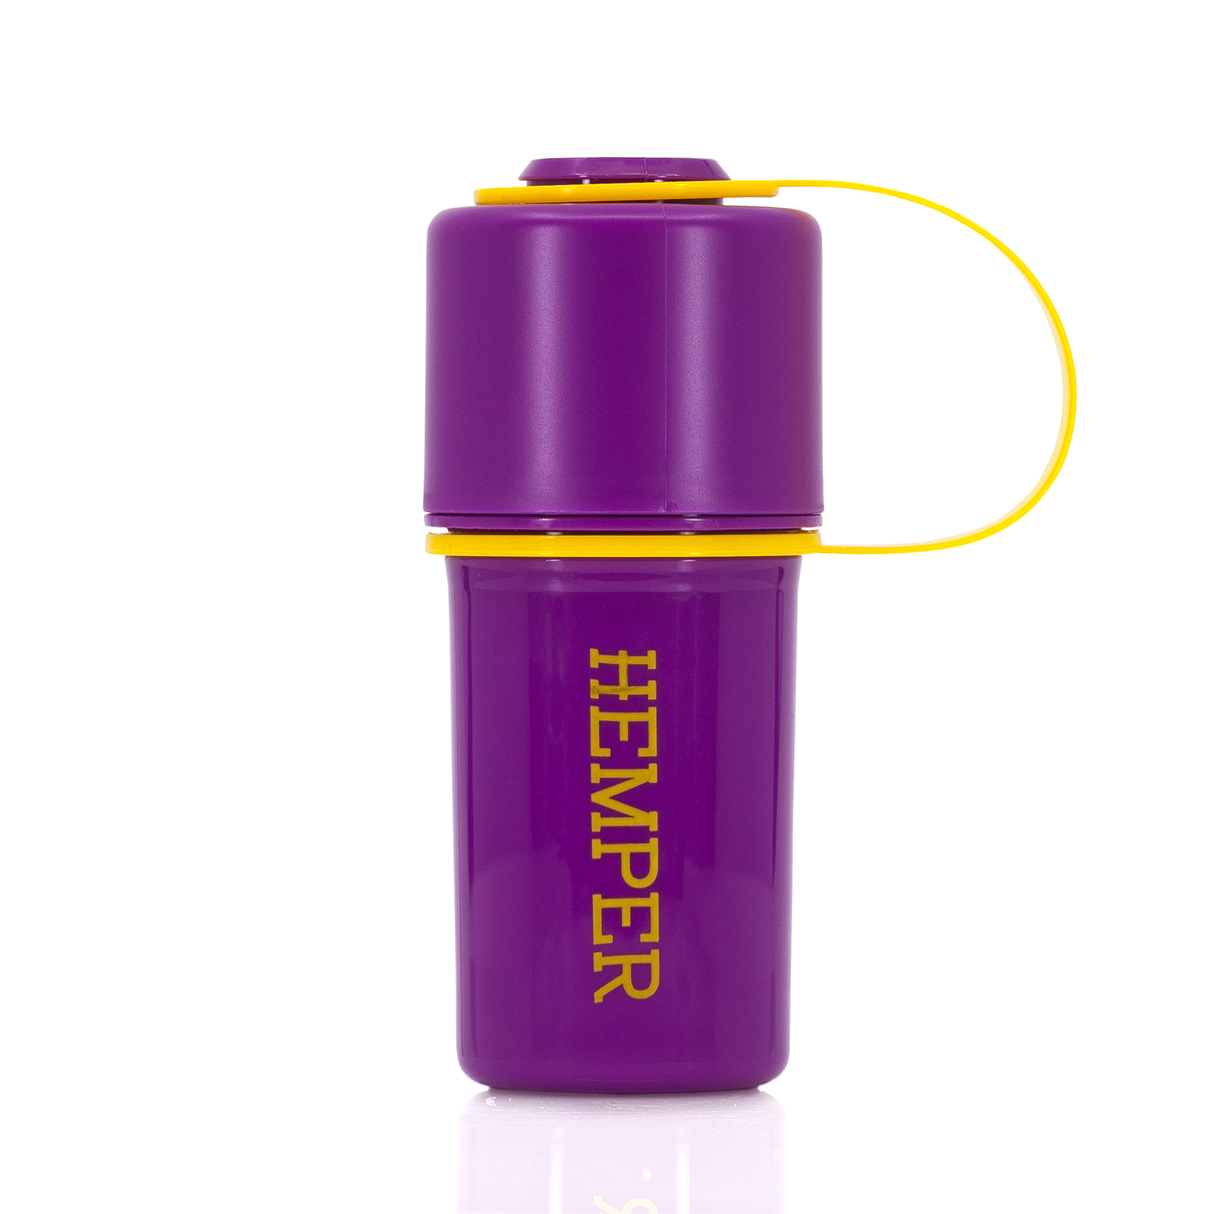 The Keeper by Hemper 3-Part Grinder in Purple with Built-in Storage - Front View